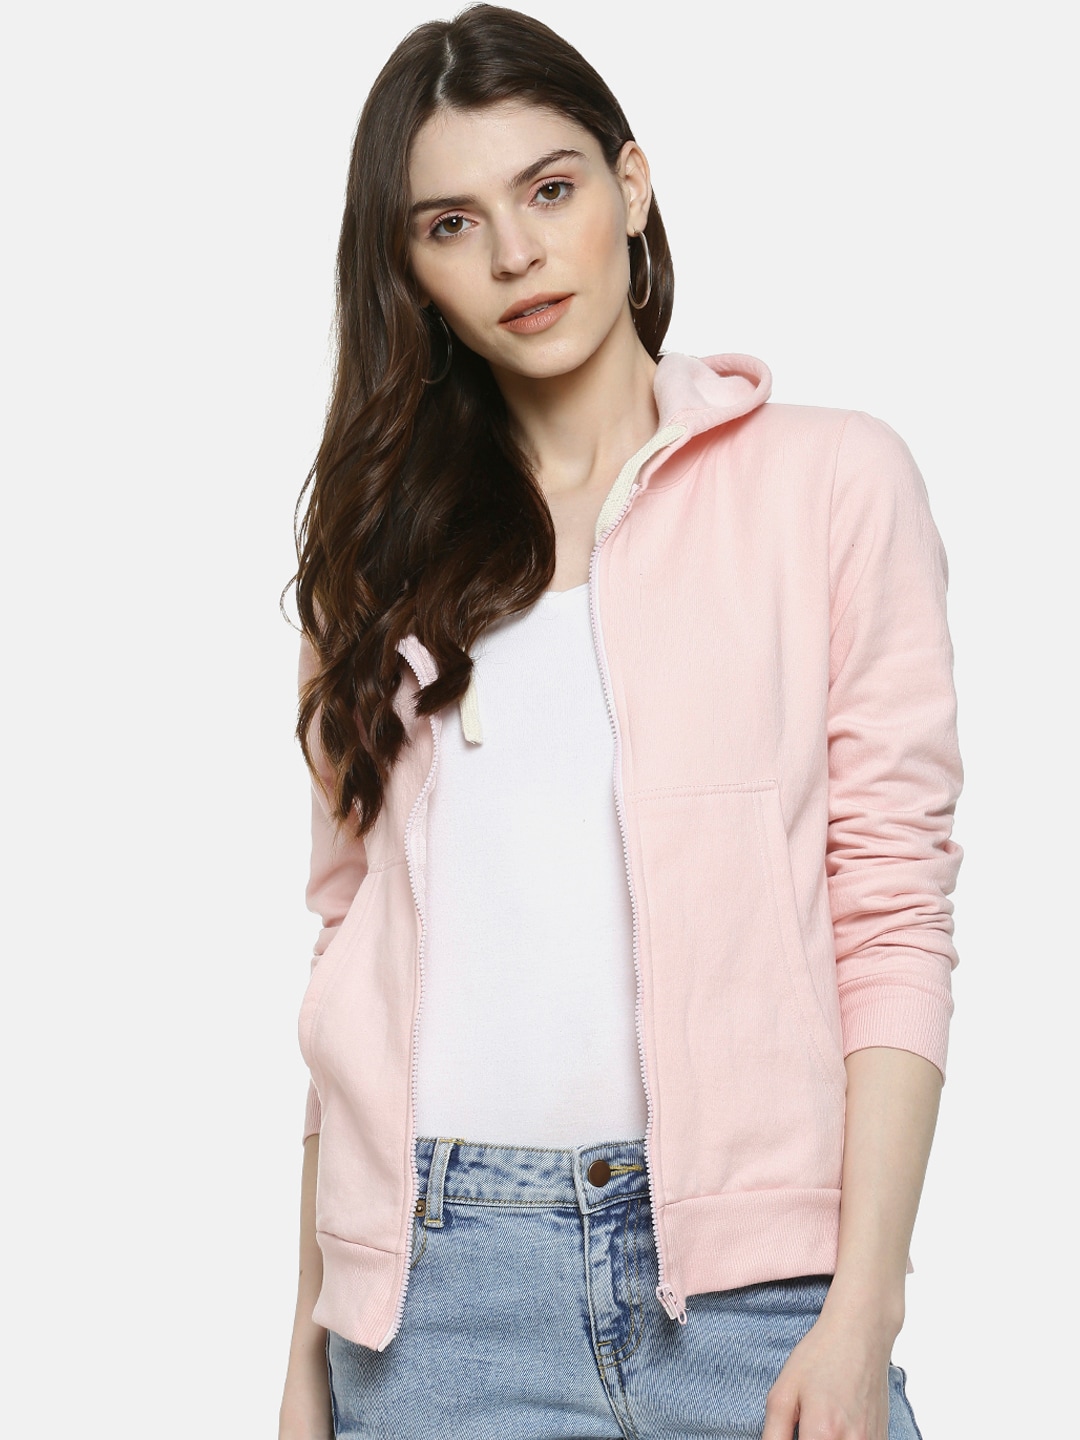 Campus Sutra Women Pink Solid Hooded Sweatshirt Price in India